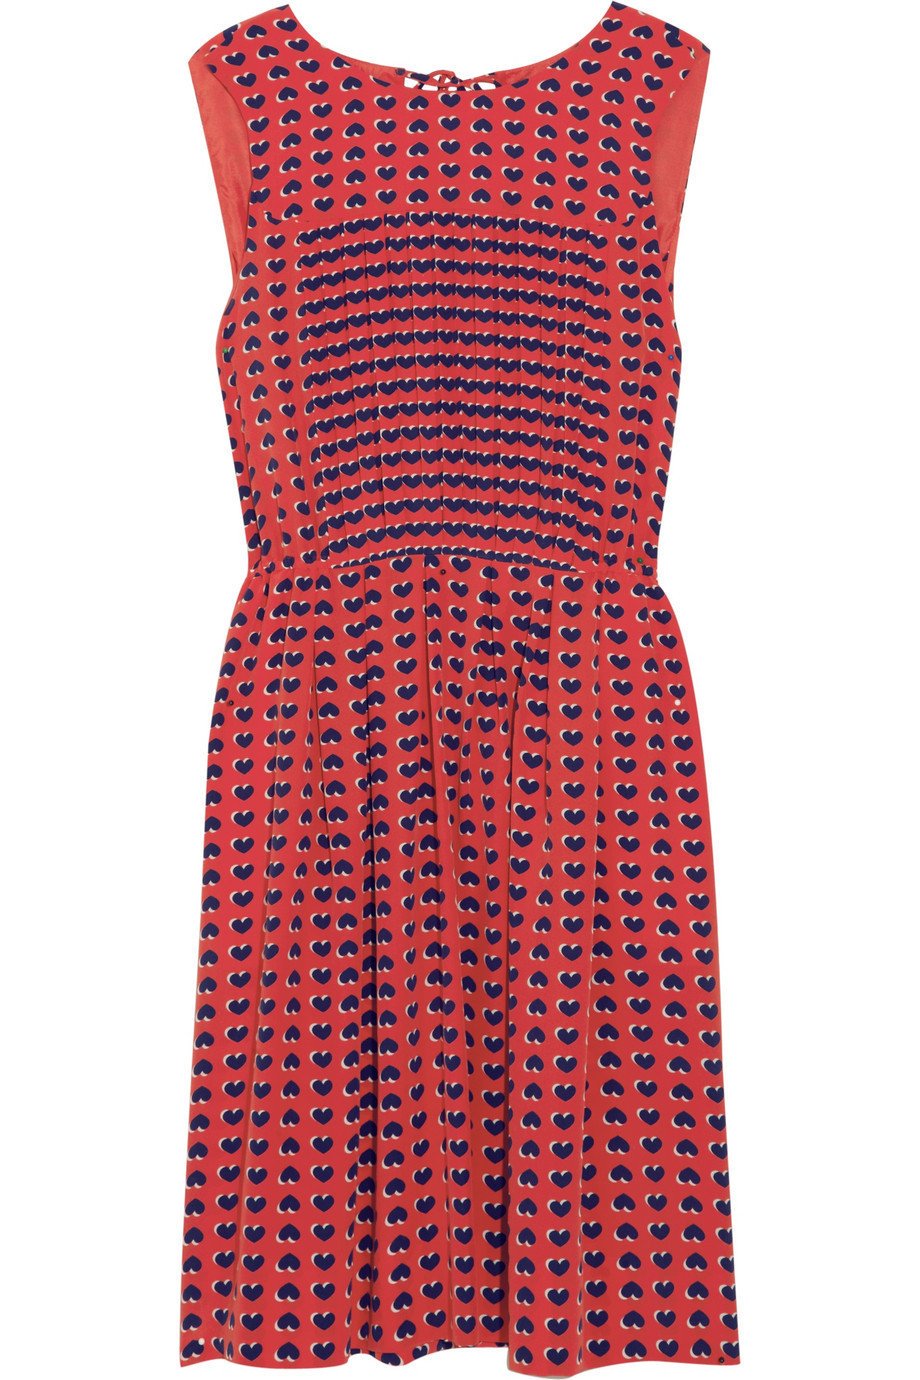 Marc by Marc Jacobs Heart-Print Dress in Red.jpg